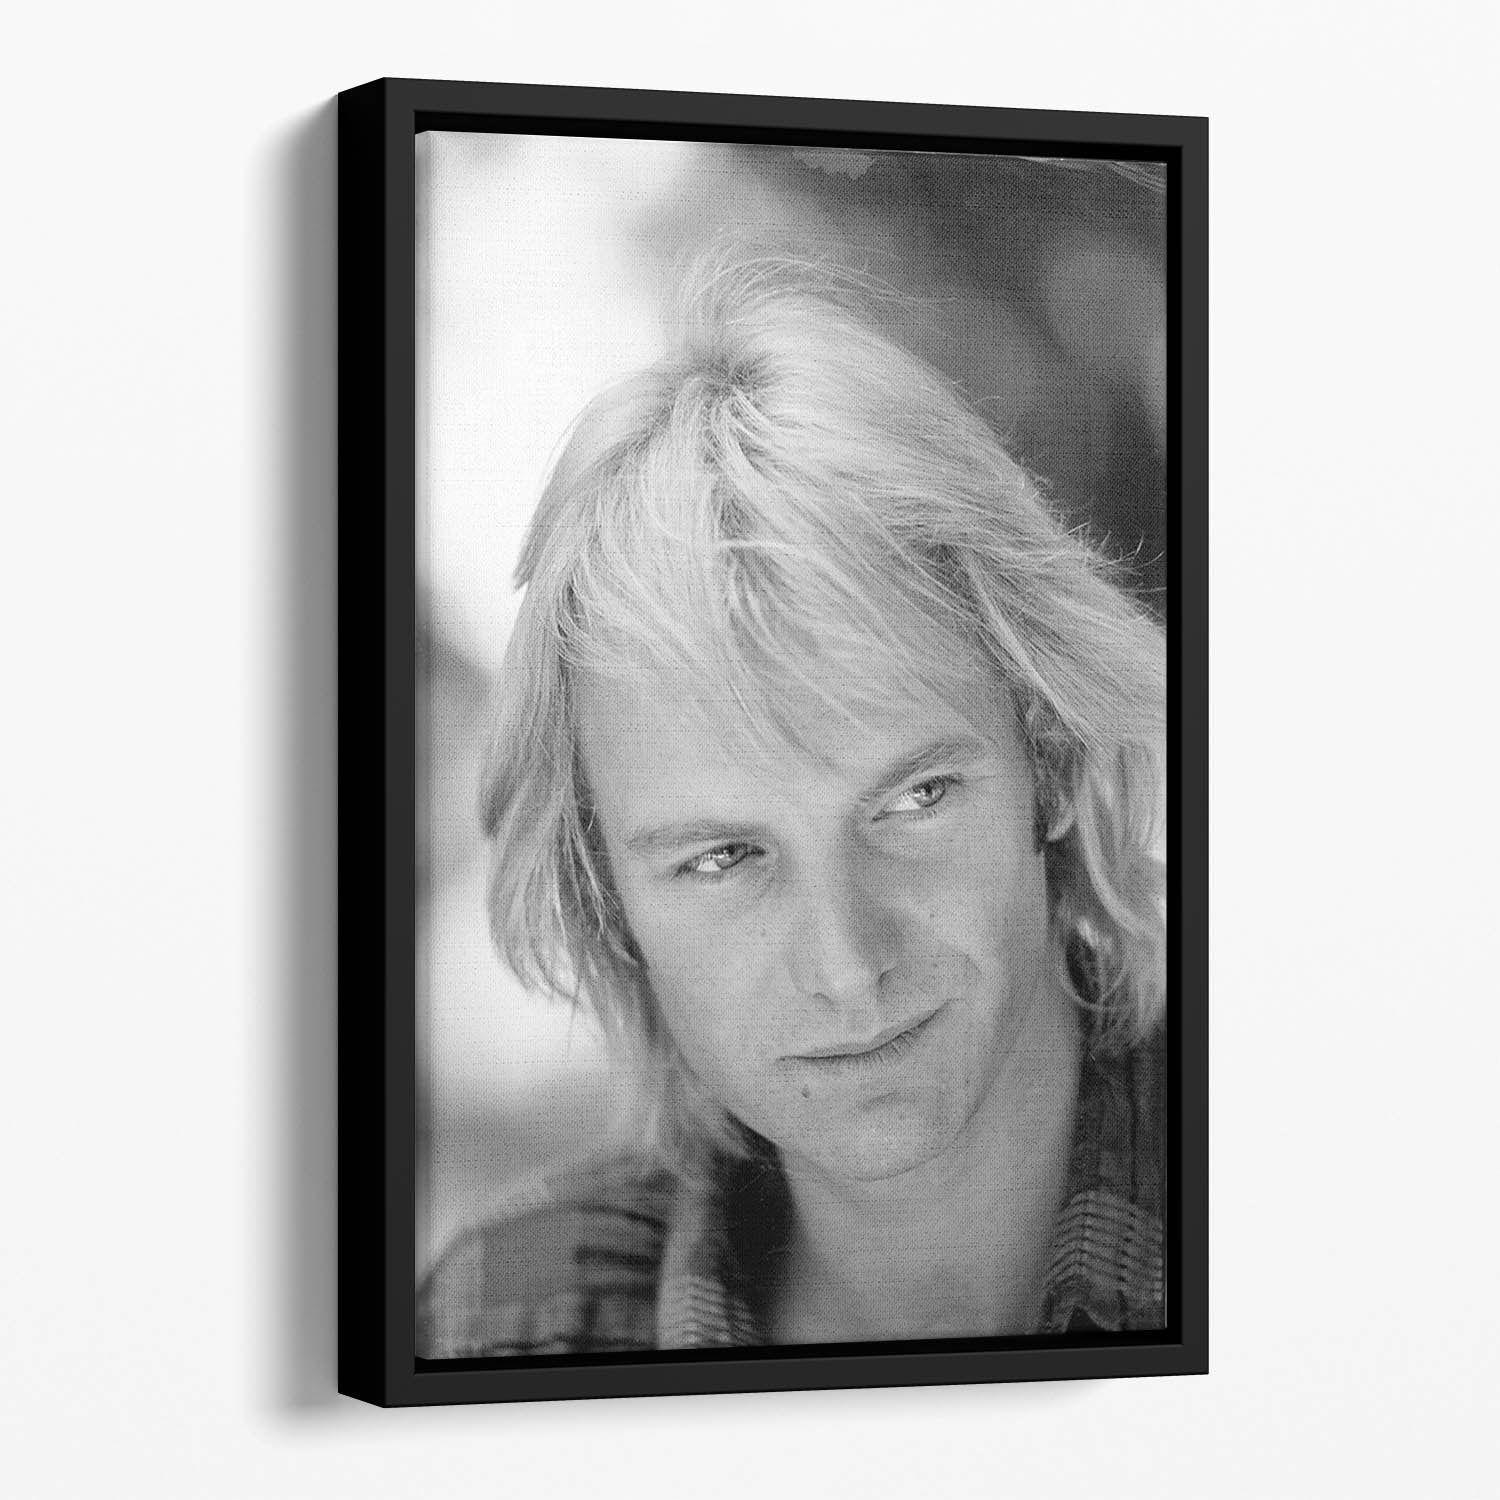 Sting in profile Floating Framed Canvas